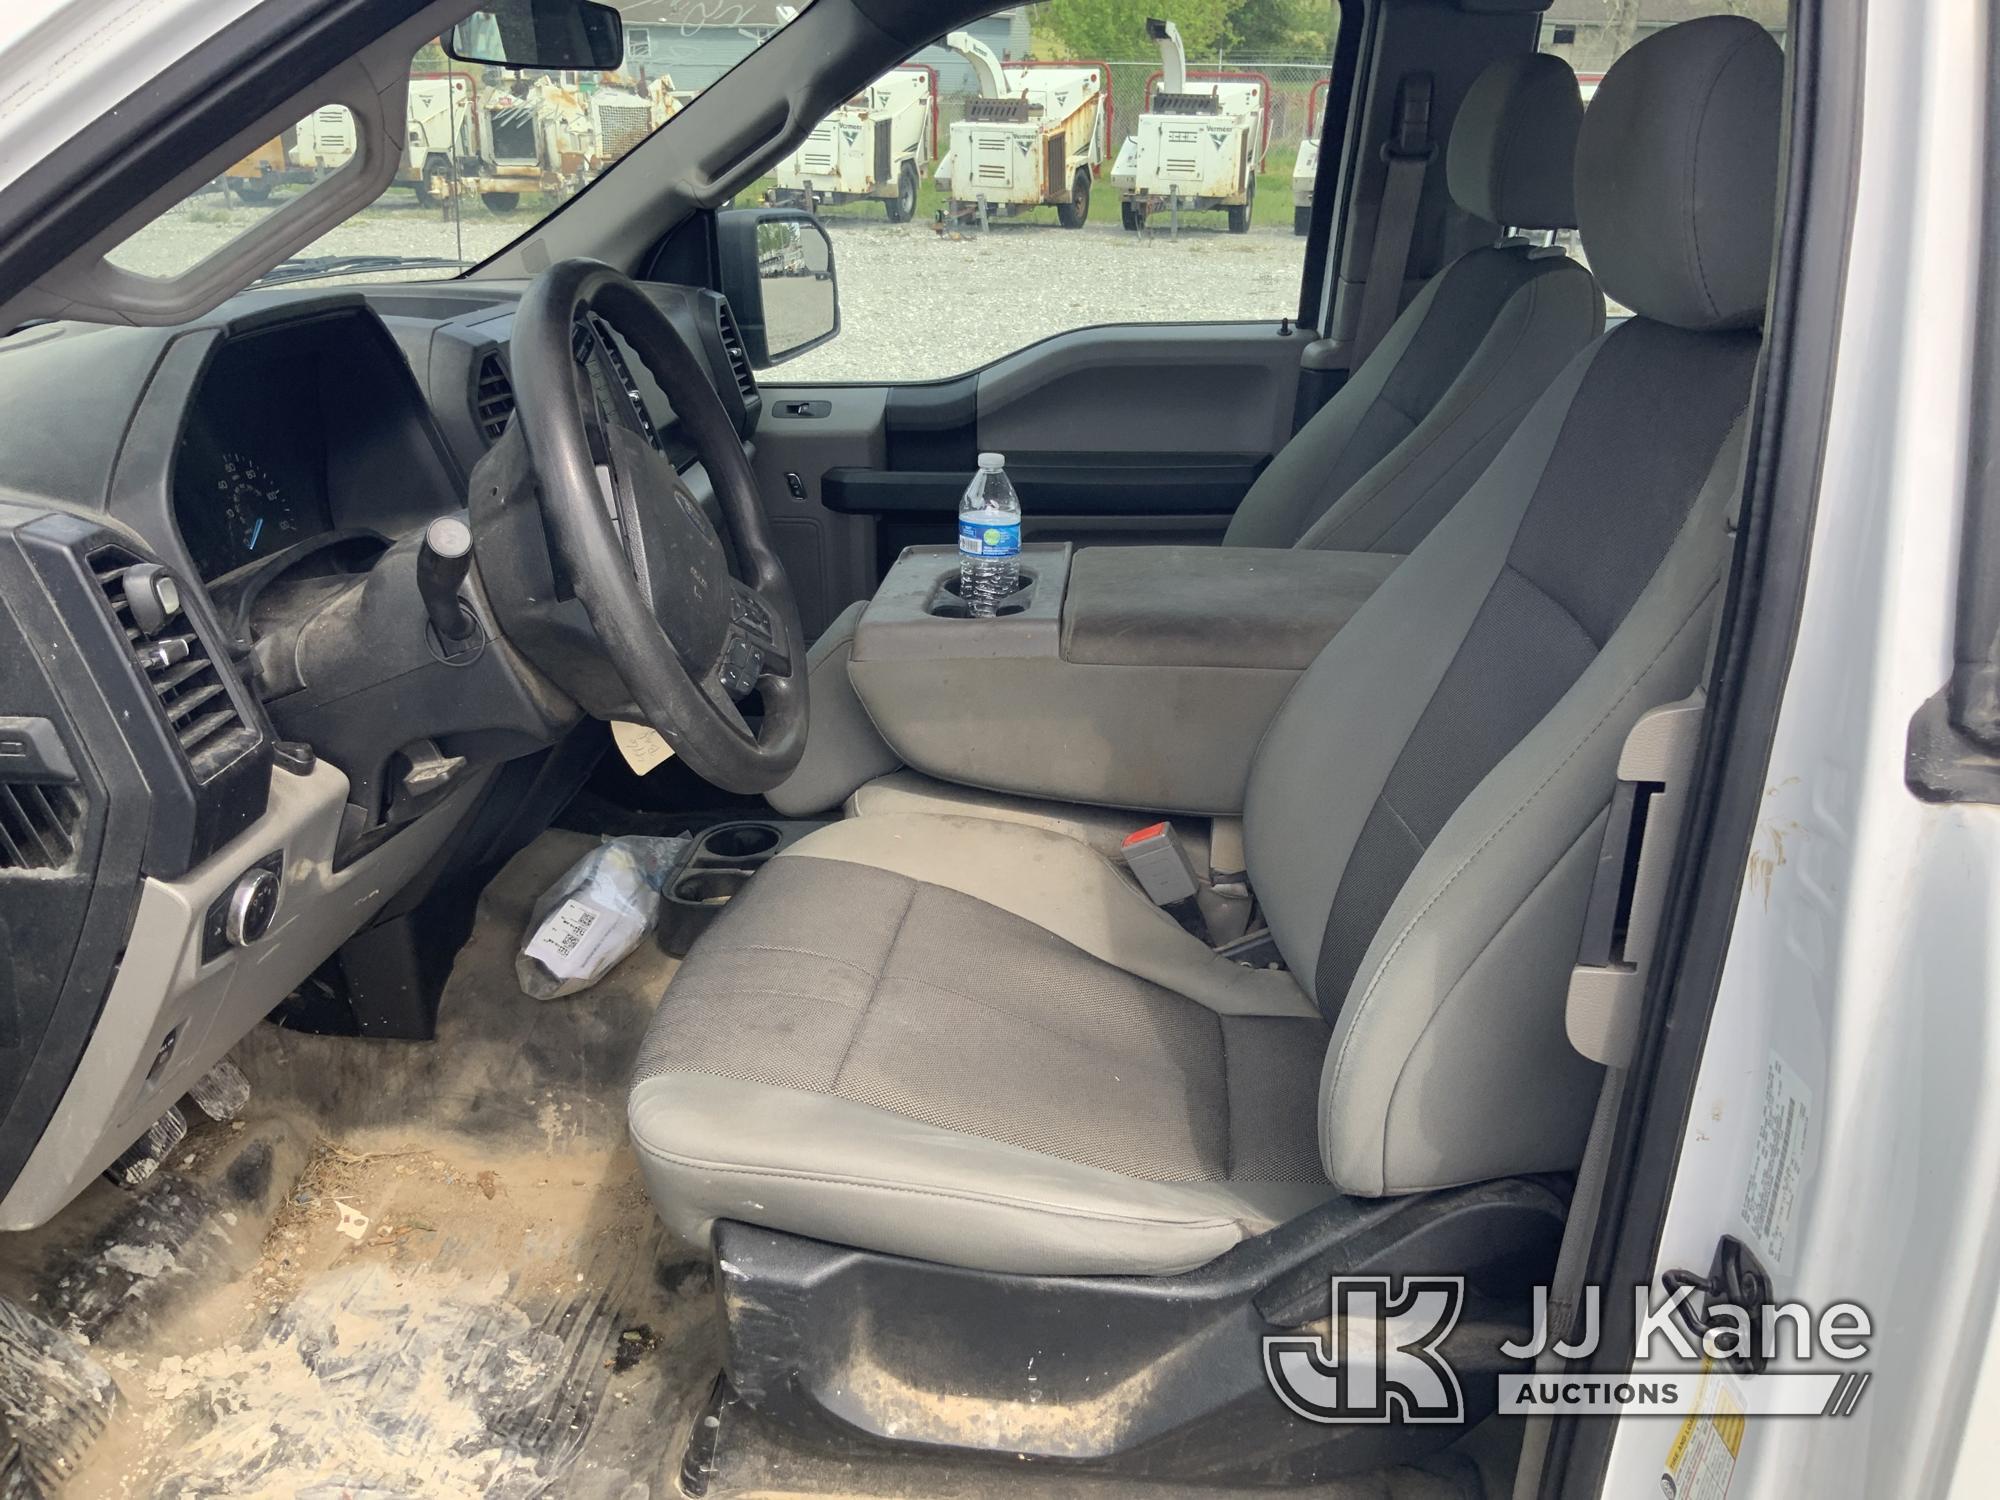 (Hawk Point, MO) 2019 Ford F150 Extended-Cab Pickup Truck Runs Rough & Moves) (Check Engine Light On